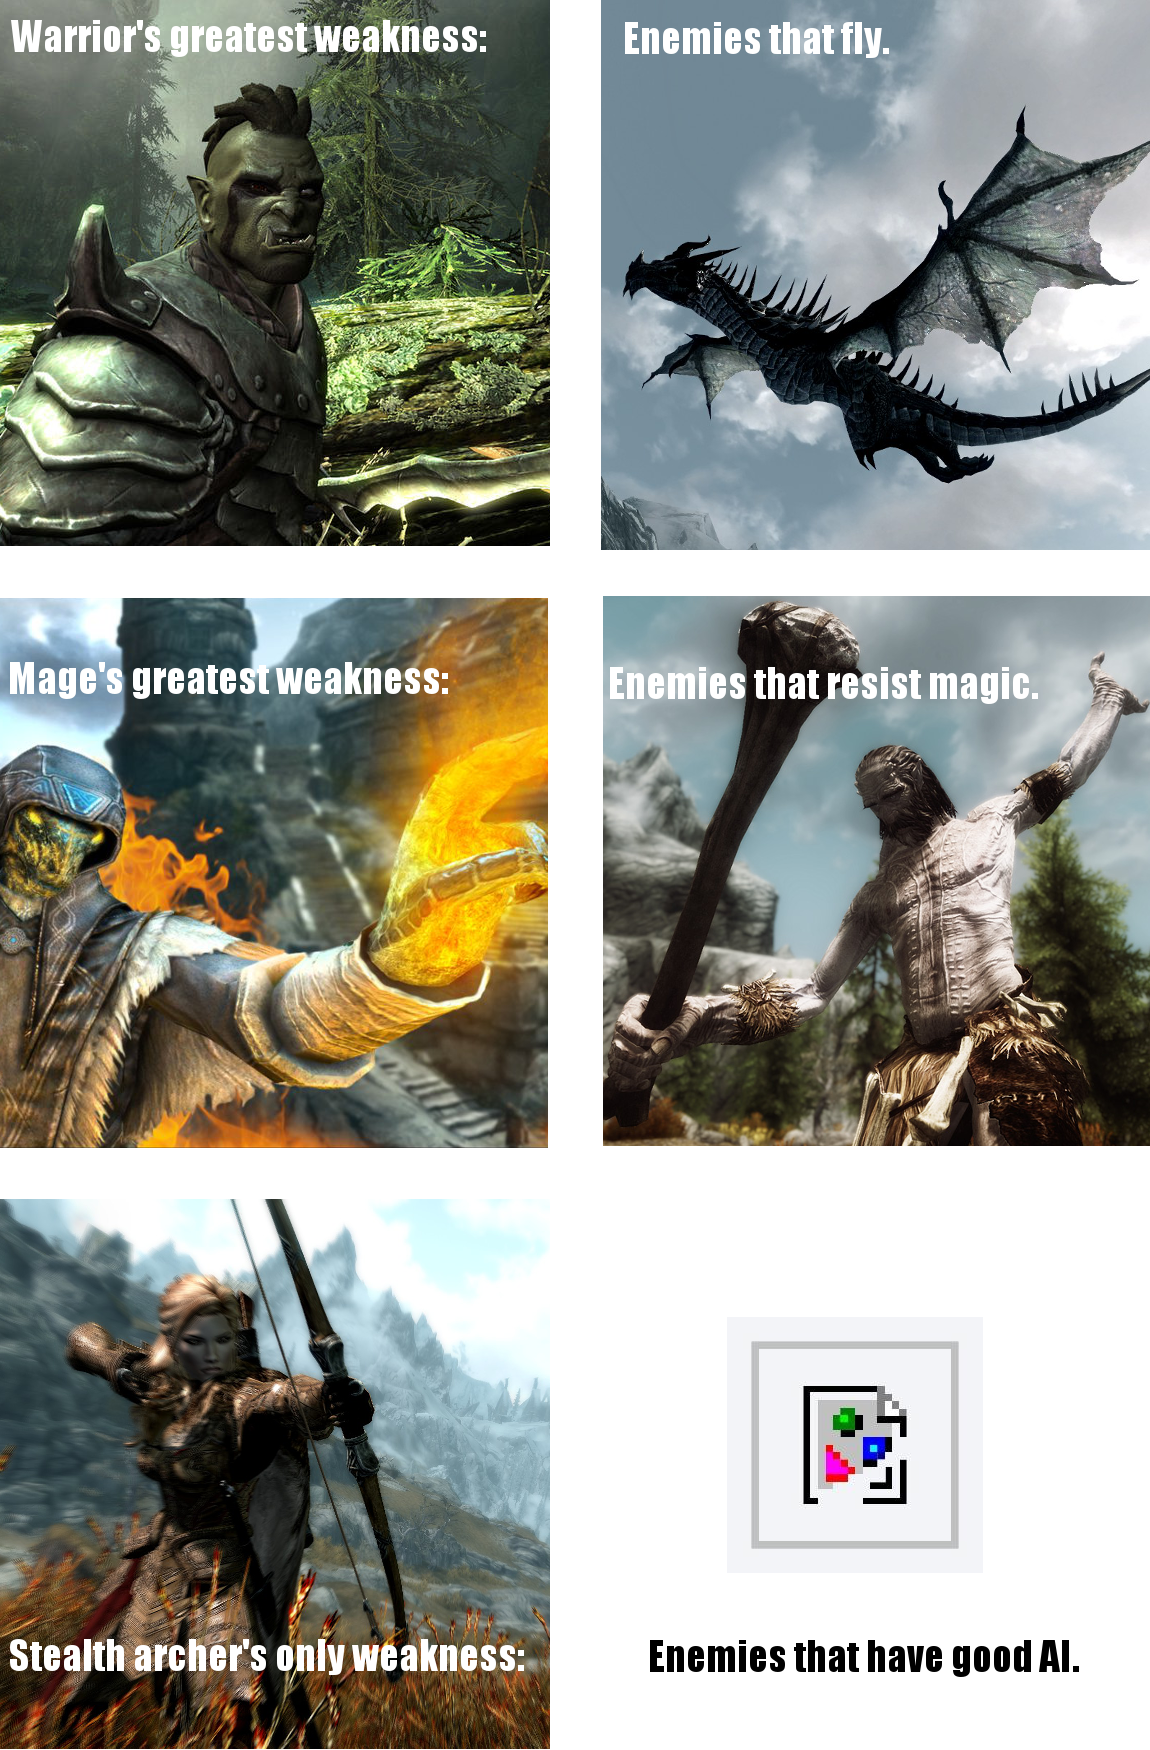 skyrim classes - Warrior's greatest weakness Enemies that fly. Mage's greatest weakness Enemies that resist magic. Stealth archer's only weakness Enemies that have good Ai.